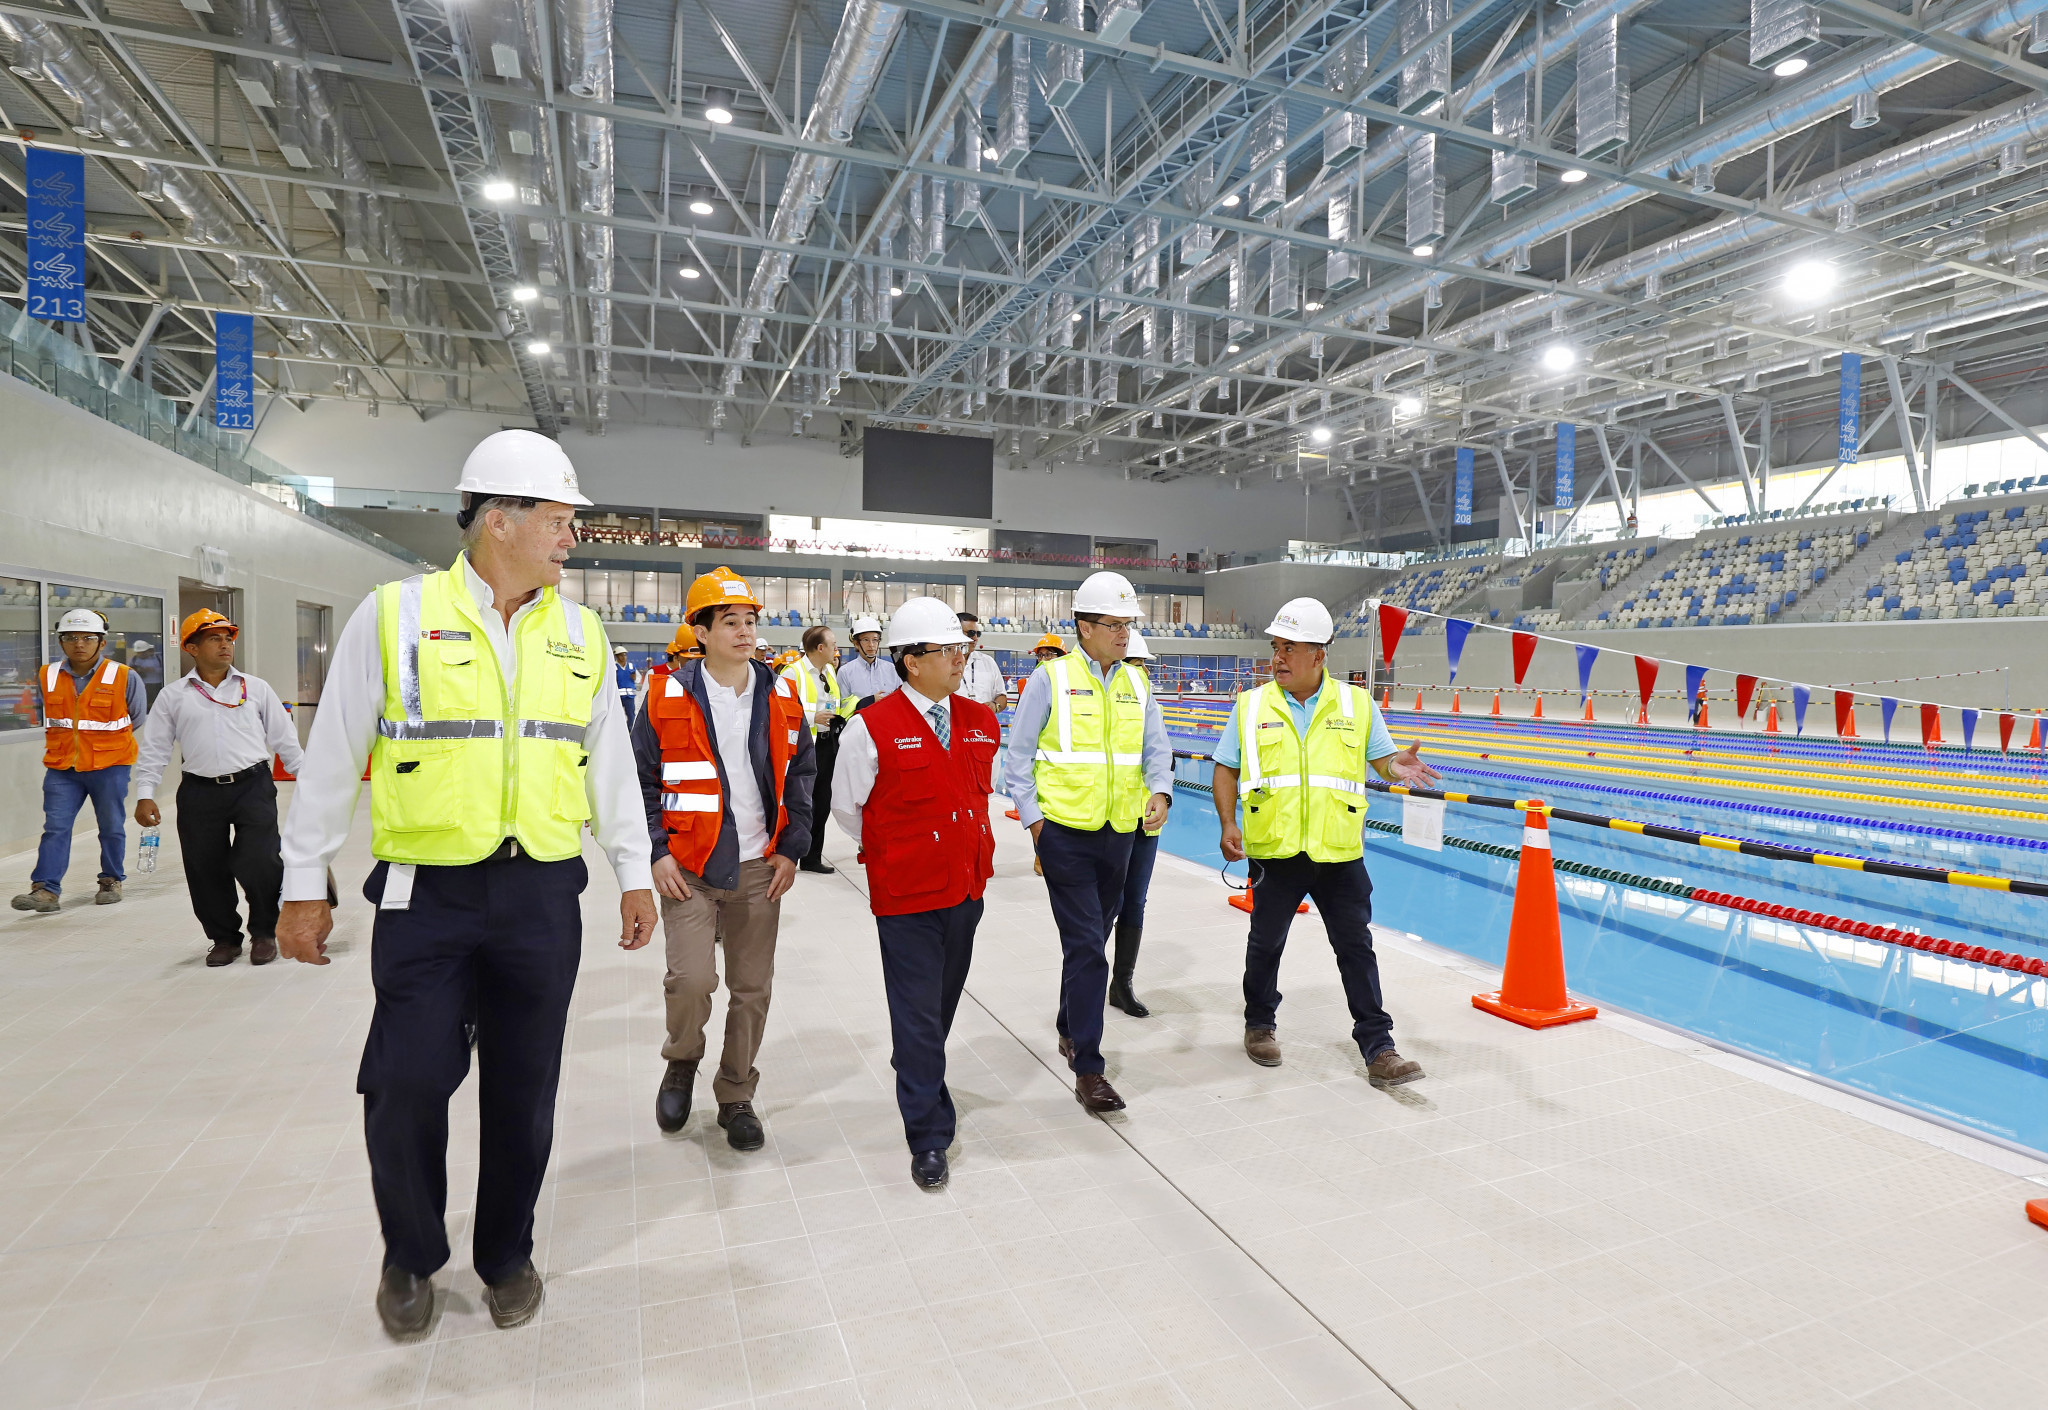 The Aquatic Centre was among the venues visited at the Videna National Sports Village ©Lima 2019